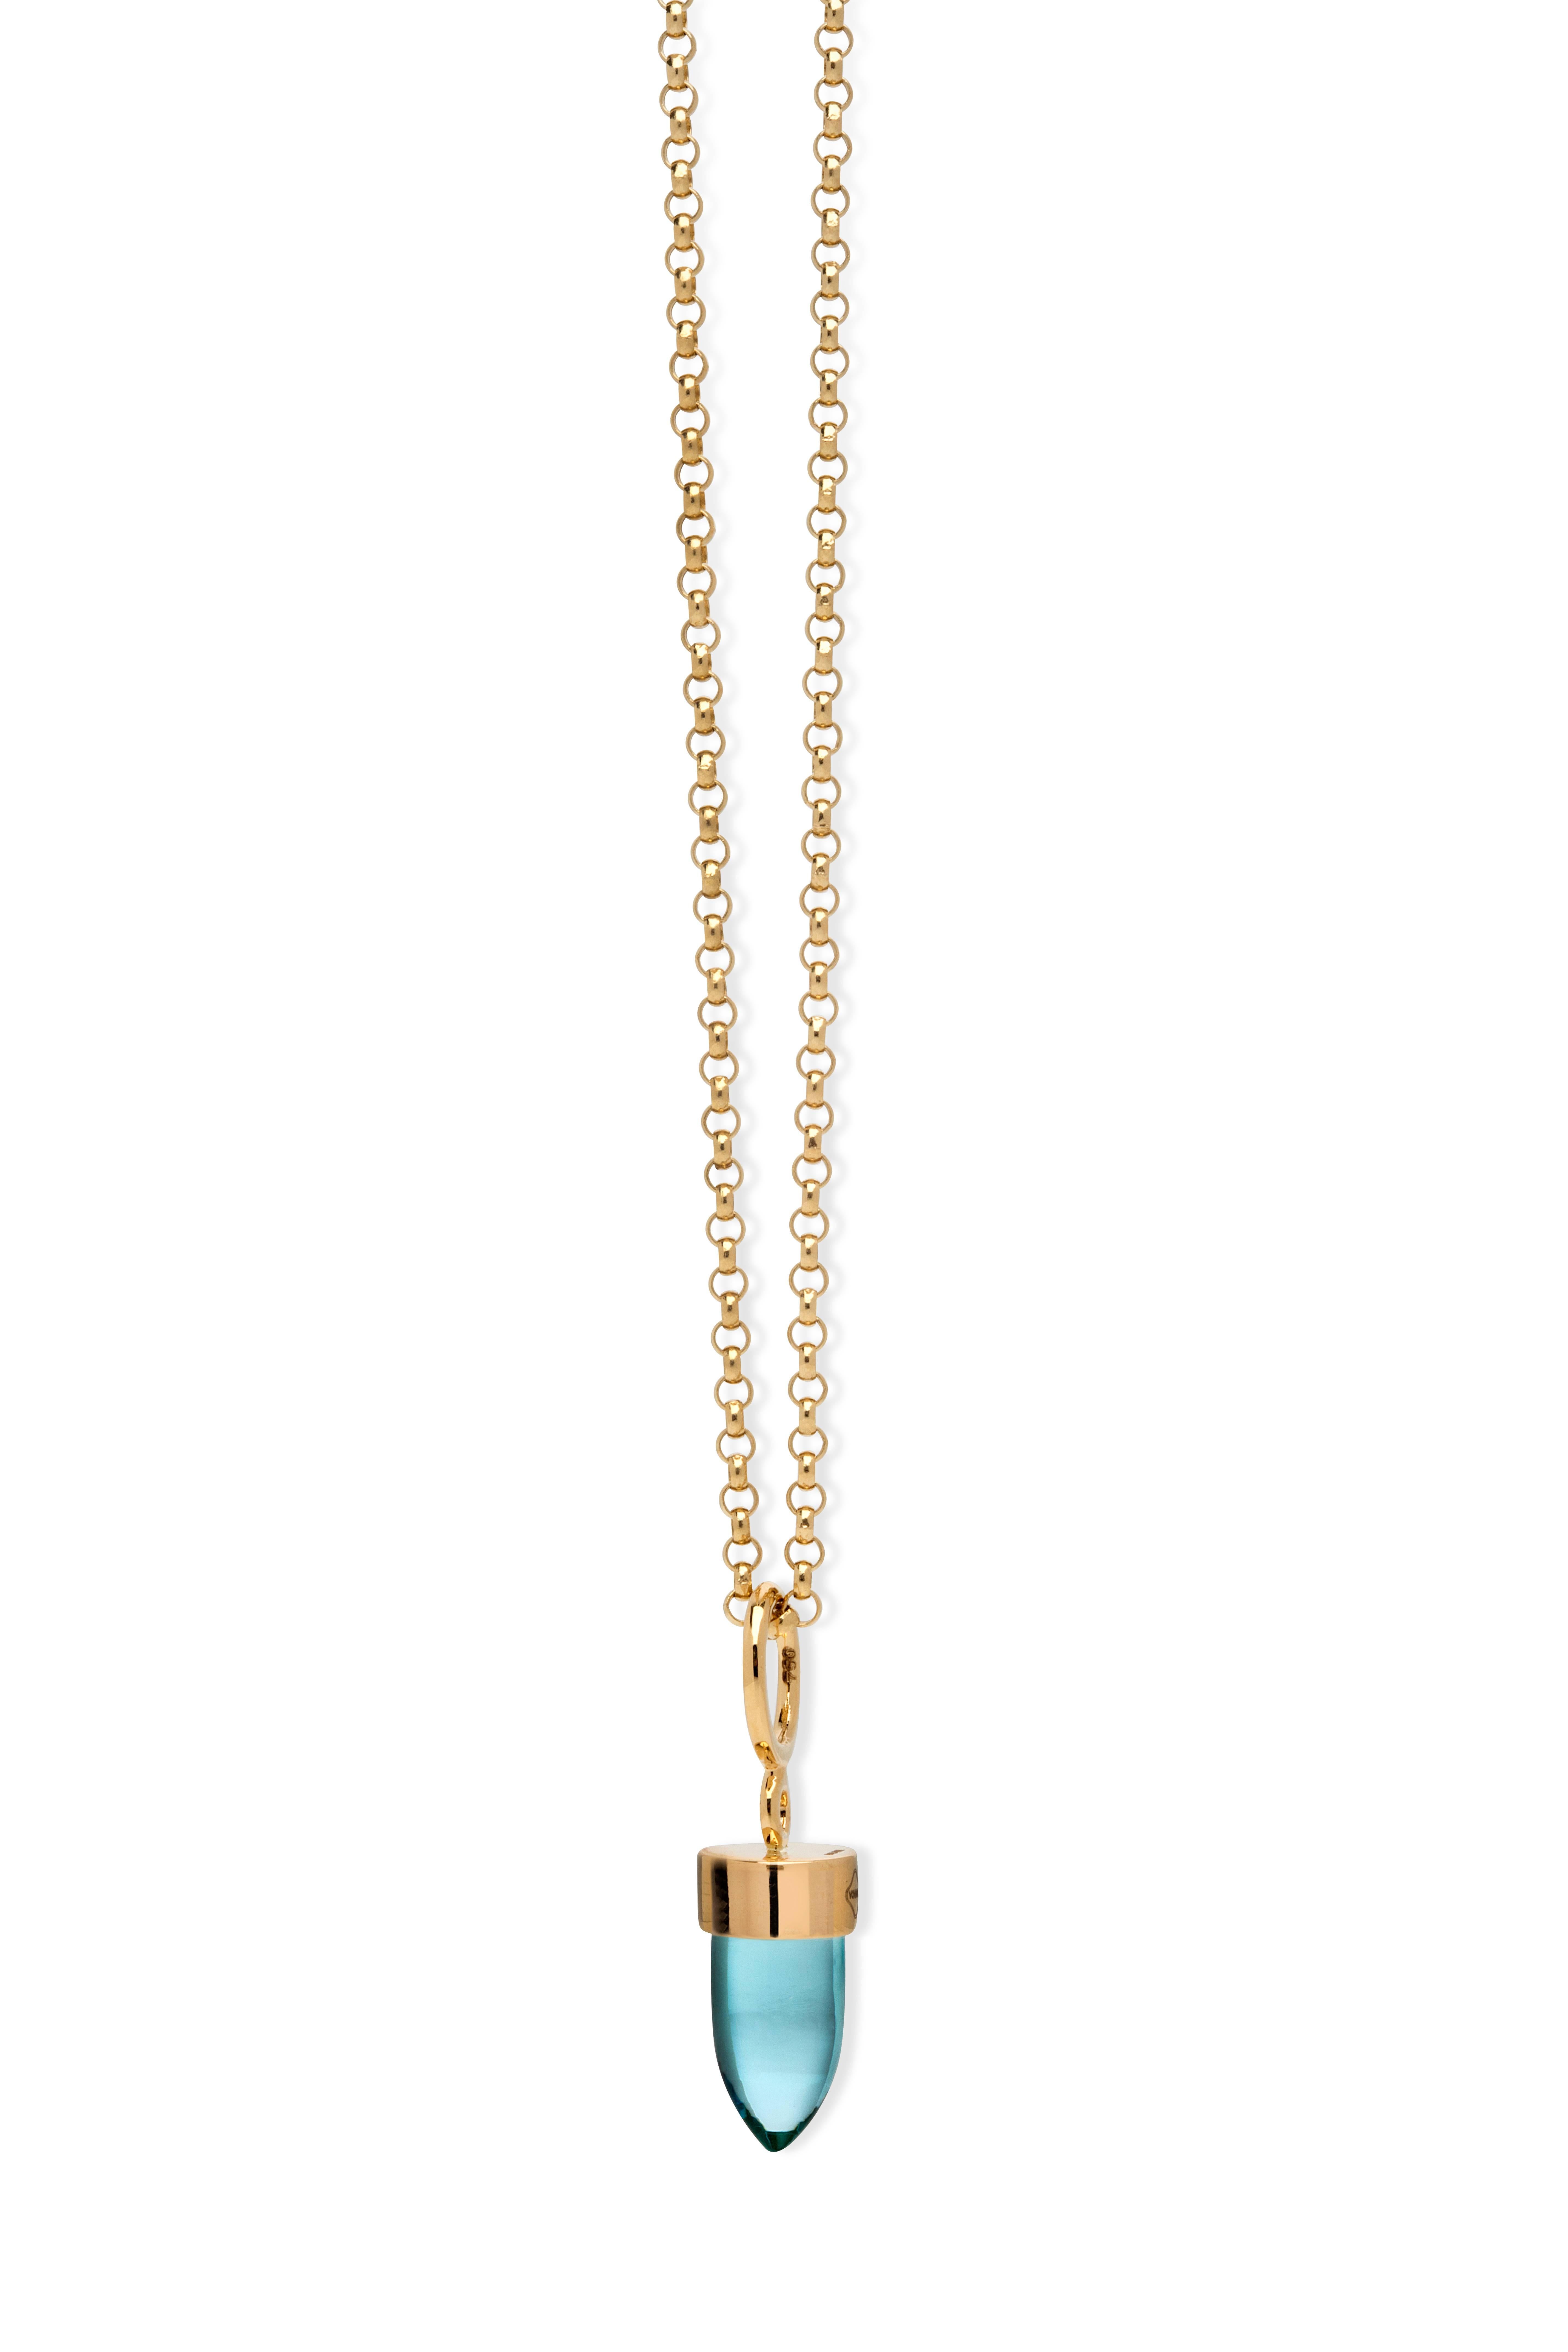 Mallorca Flat
18kt yellow gold pendant, 8x15mm stone
These gorgeous pendants with bullet shaped smooth cut stones are designed to be versatile. Wear them alone, in multiples of three, with a chain, or with a cord, you have so many choices! The